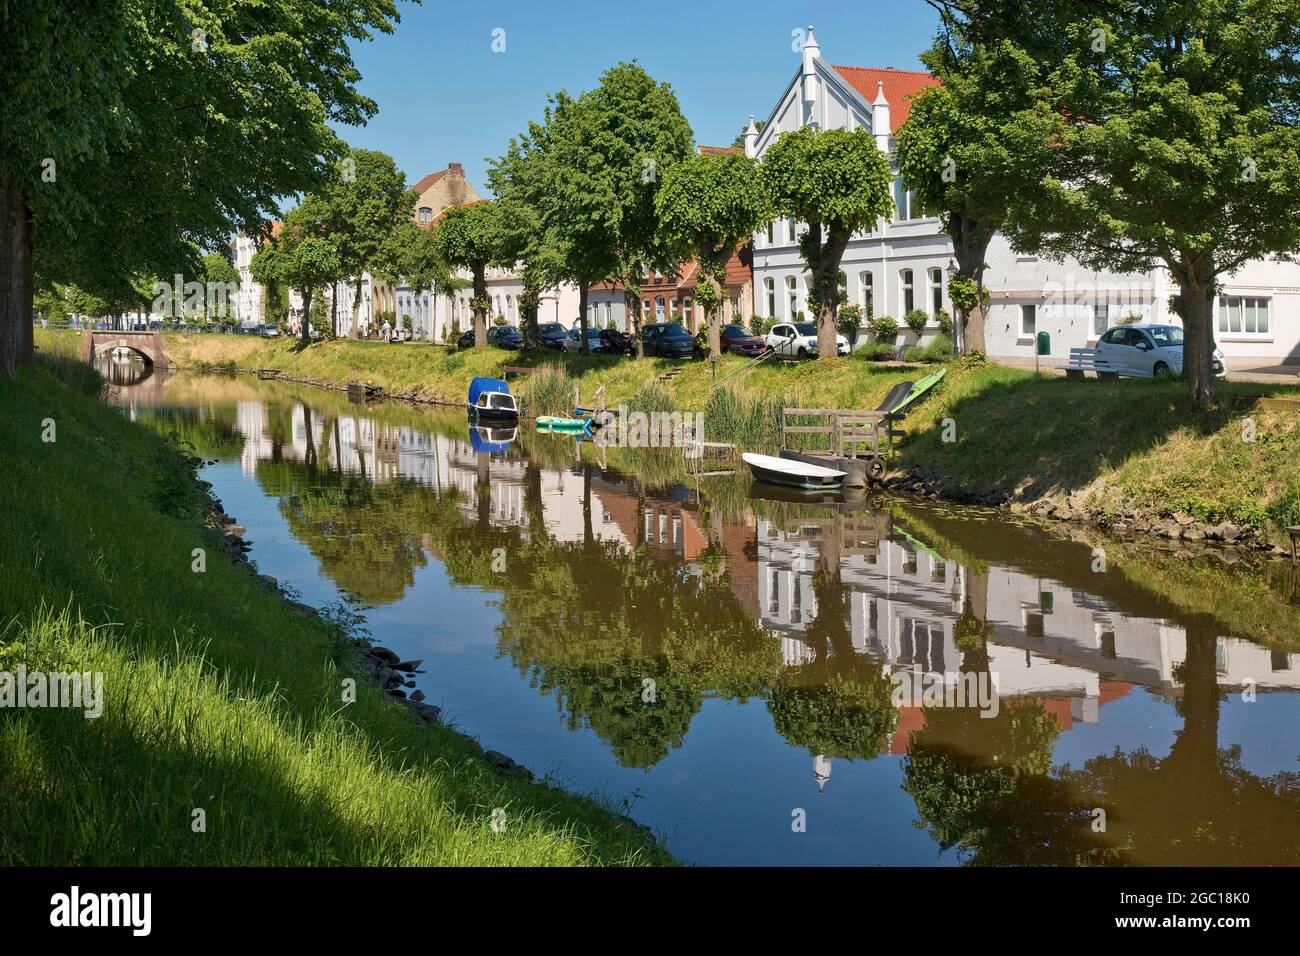 canal and row of houses, Germany, Schleswig-Holstein, Northern Frisia, Friedrichstadt Stock Photo